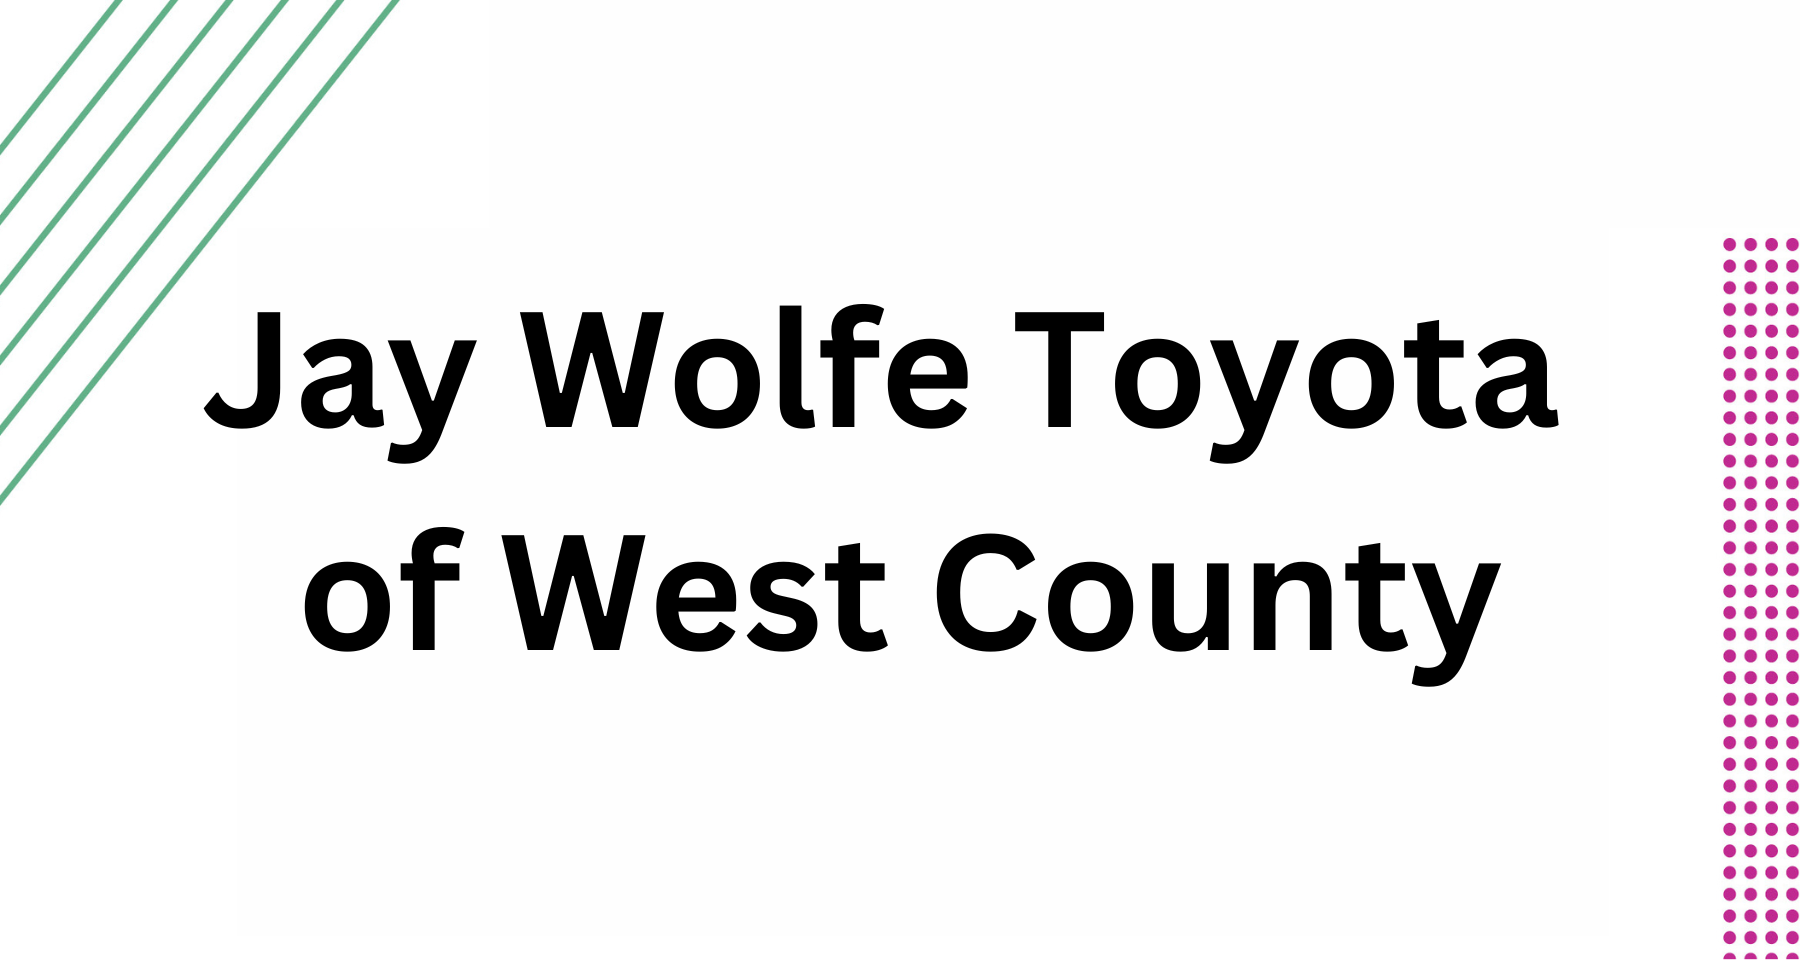 Jay Wolfe Toyota of West County